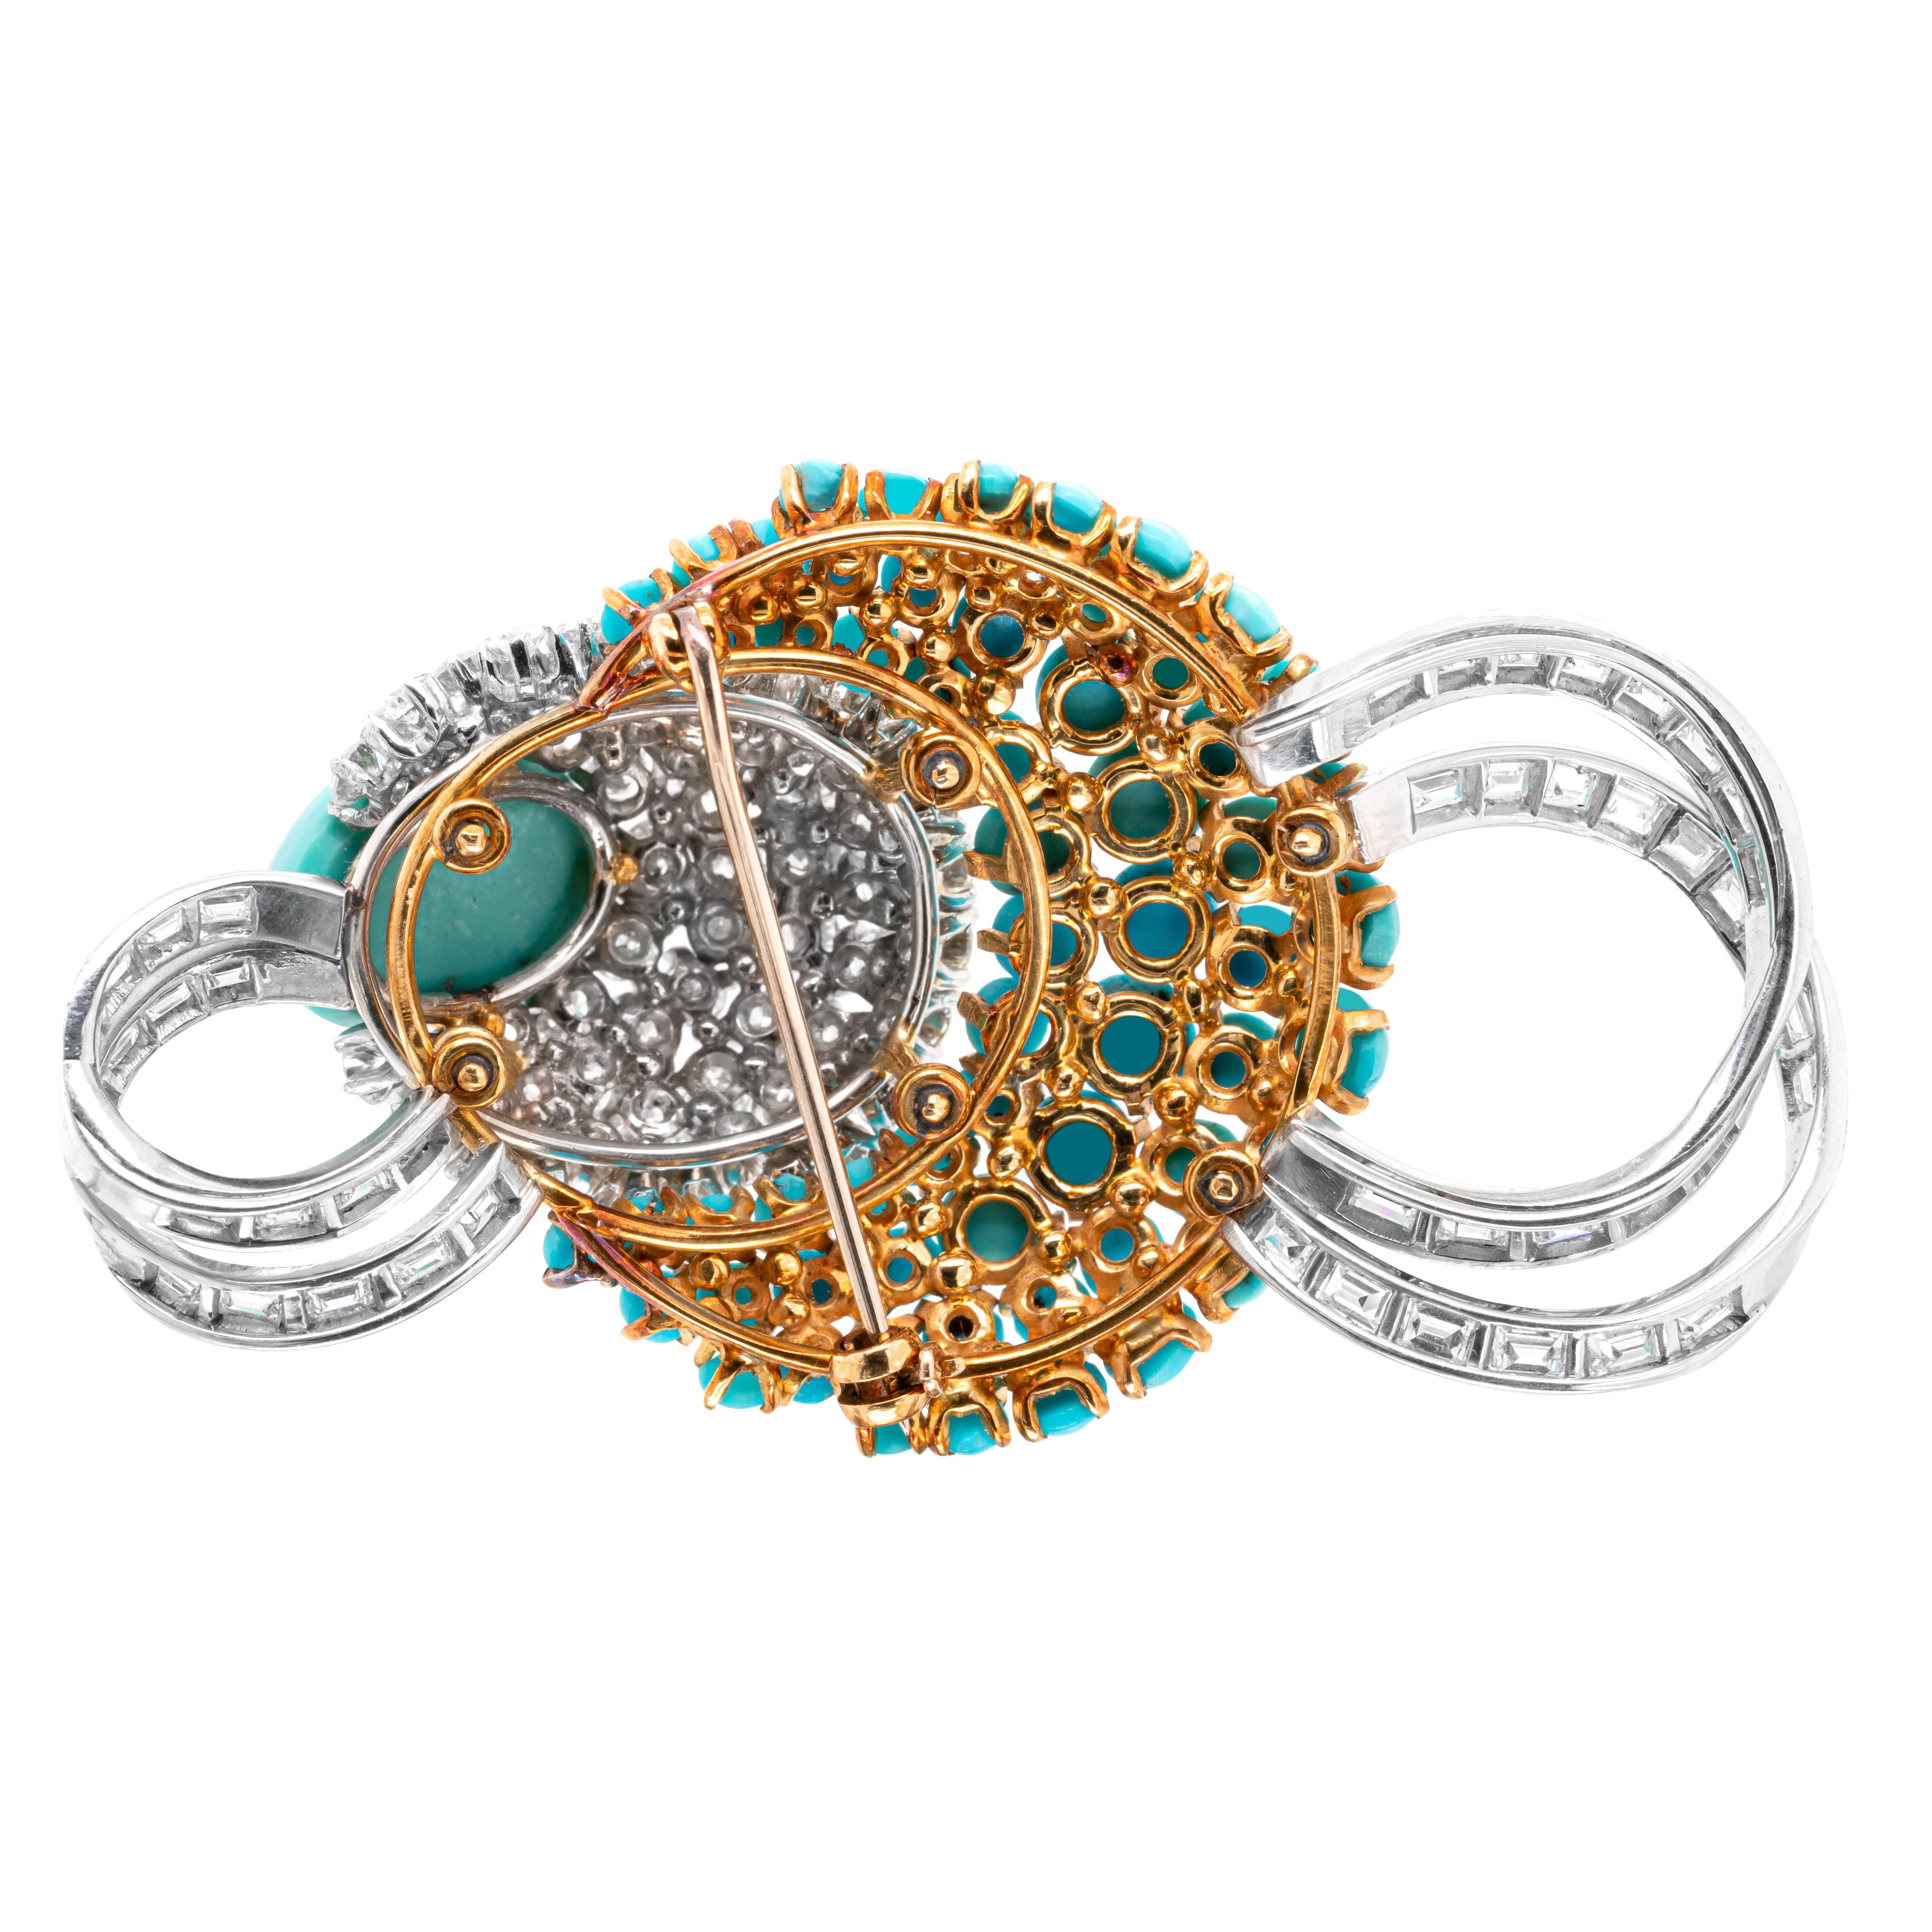 This unusual brooch features a 15x11mm oval shaped cabochon turquoise, claw set within five graduating half moon shaped rows of 63 round brilliant cut diamonds, all claw set in 18 carat white gold mounts. The five diamond rows are followed by a